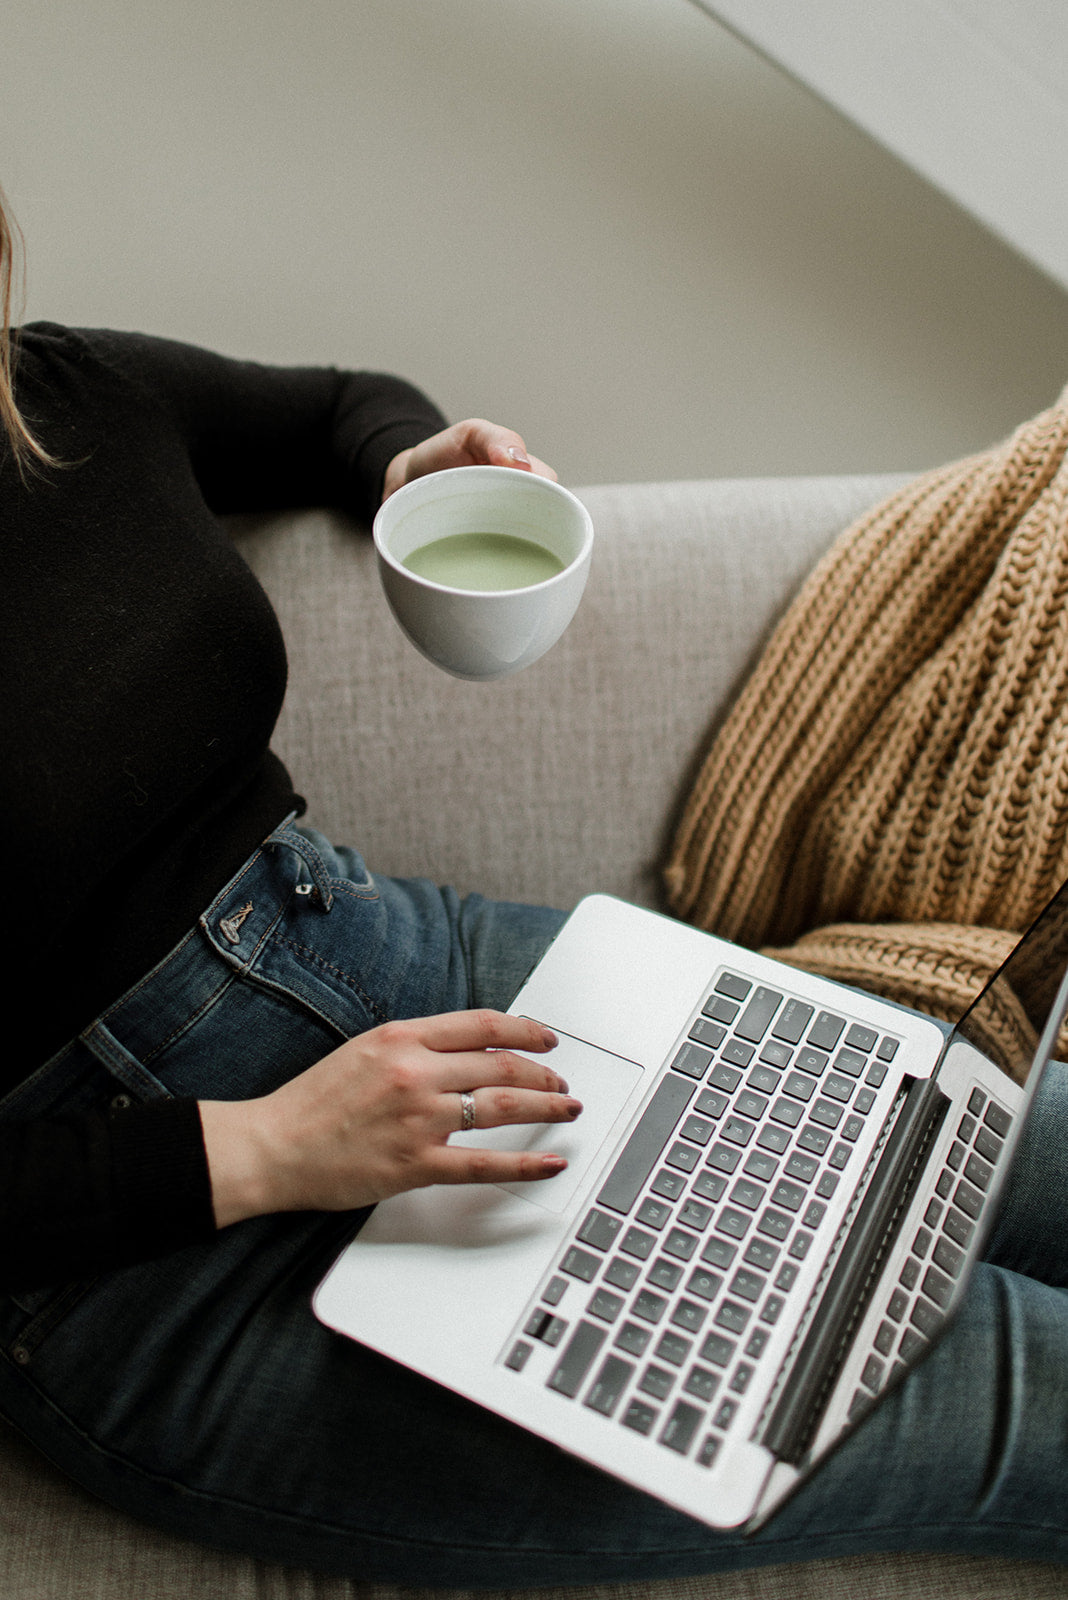 person on couch using laptop with beverage in hand